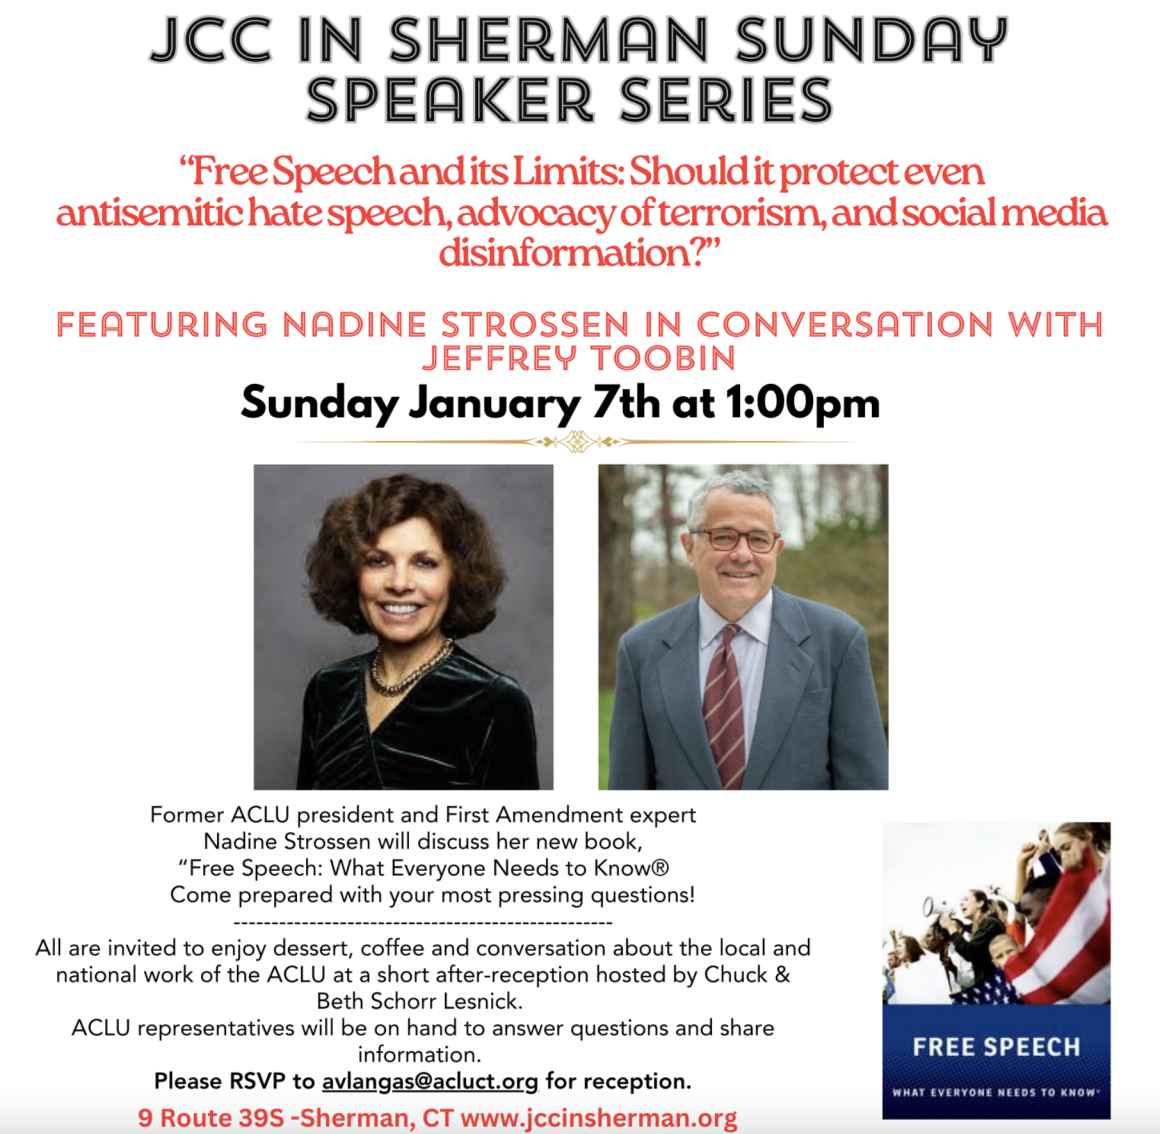 This is an image of a flyer for JCC's speaker event. The event features a conversation between Nadine Strossen and Jeffrey Toobin, who will be talking about free speech and its implications on disinformation.